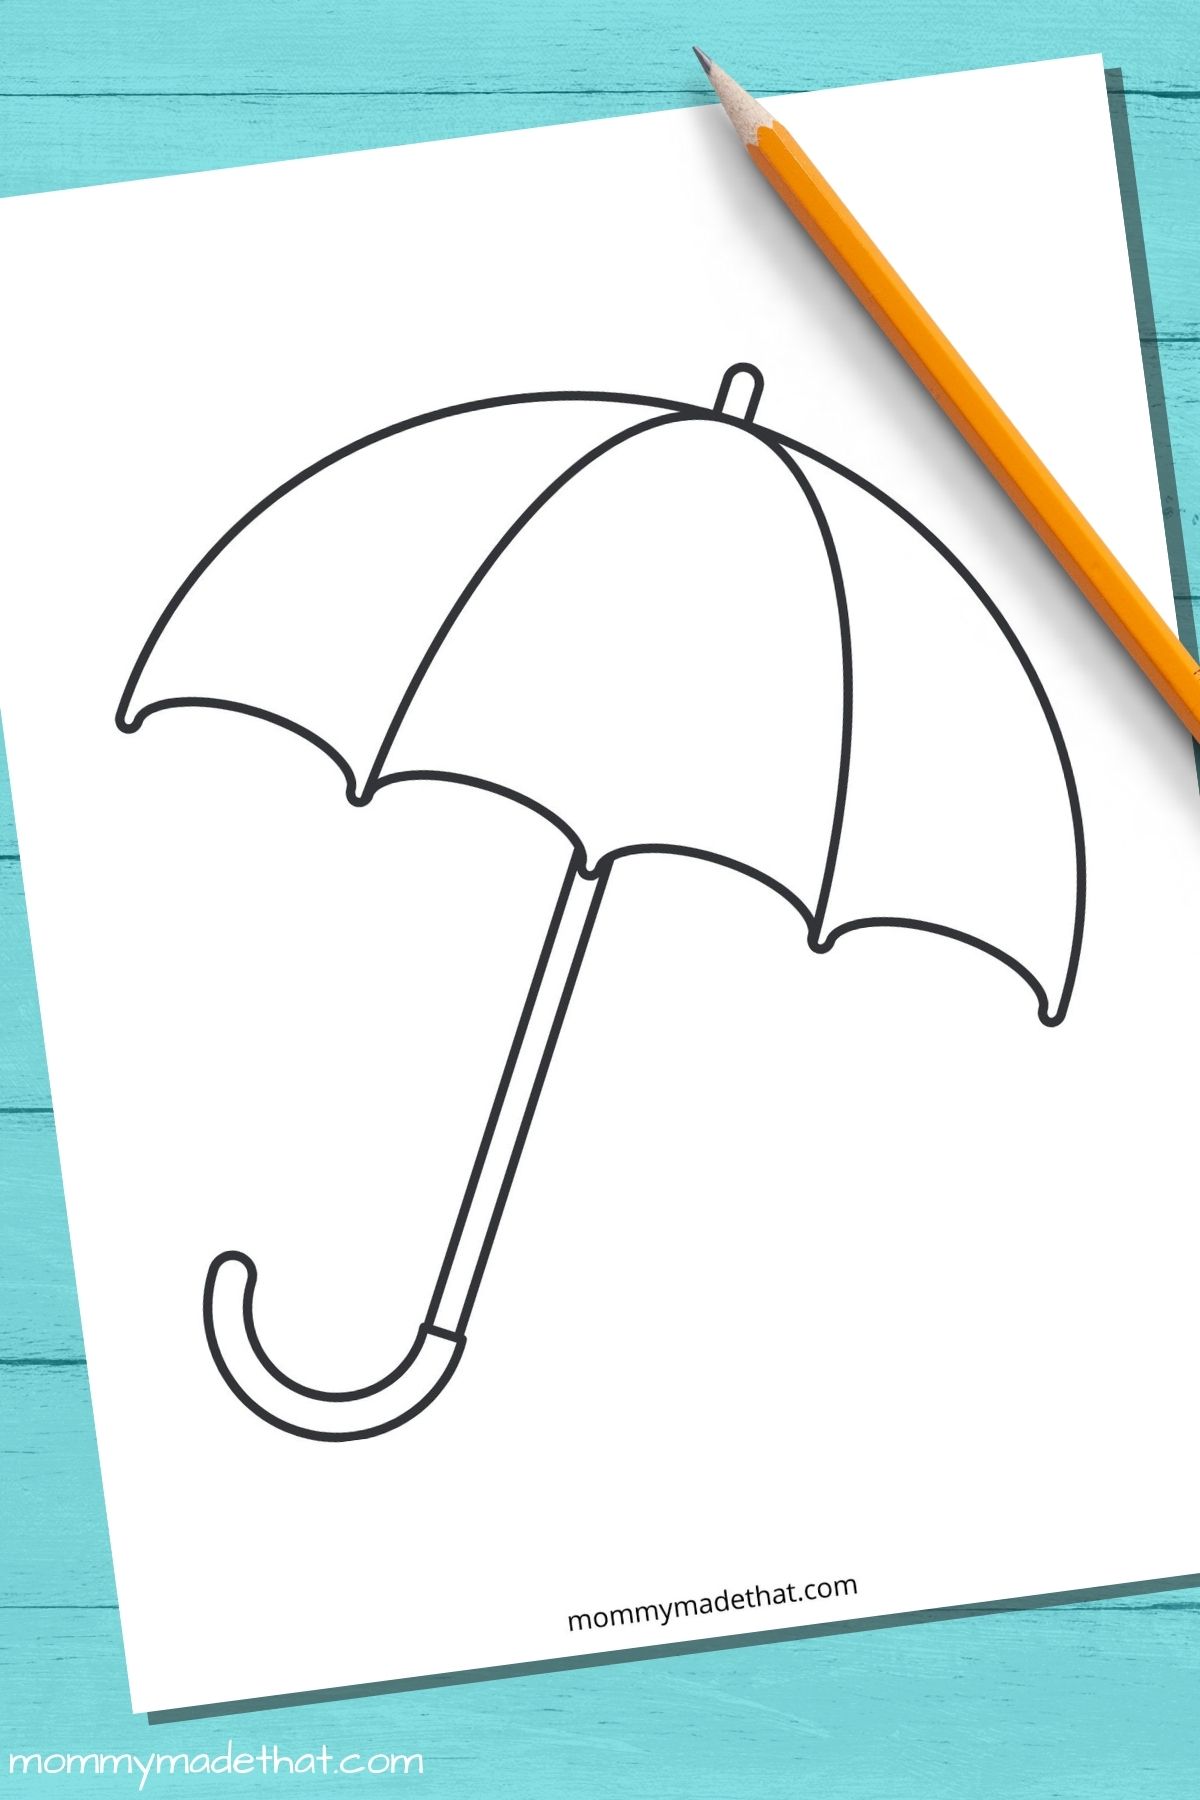 Umbrella template and outlines free printables